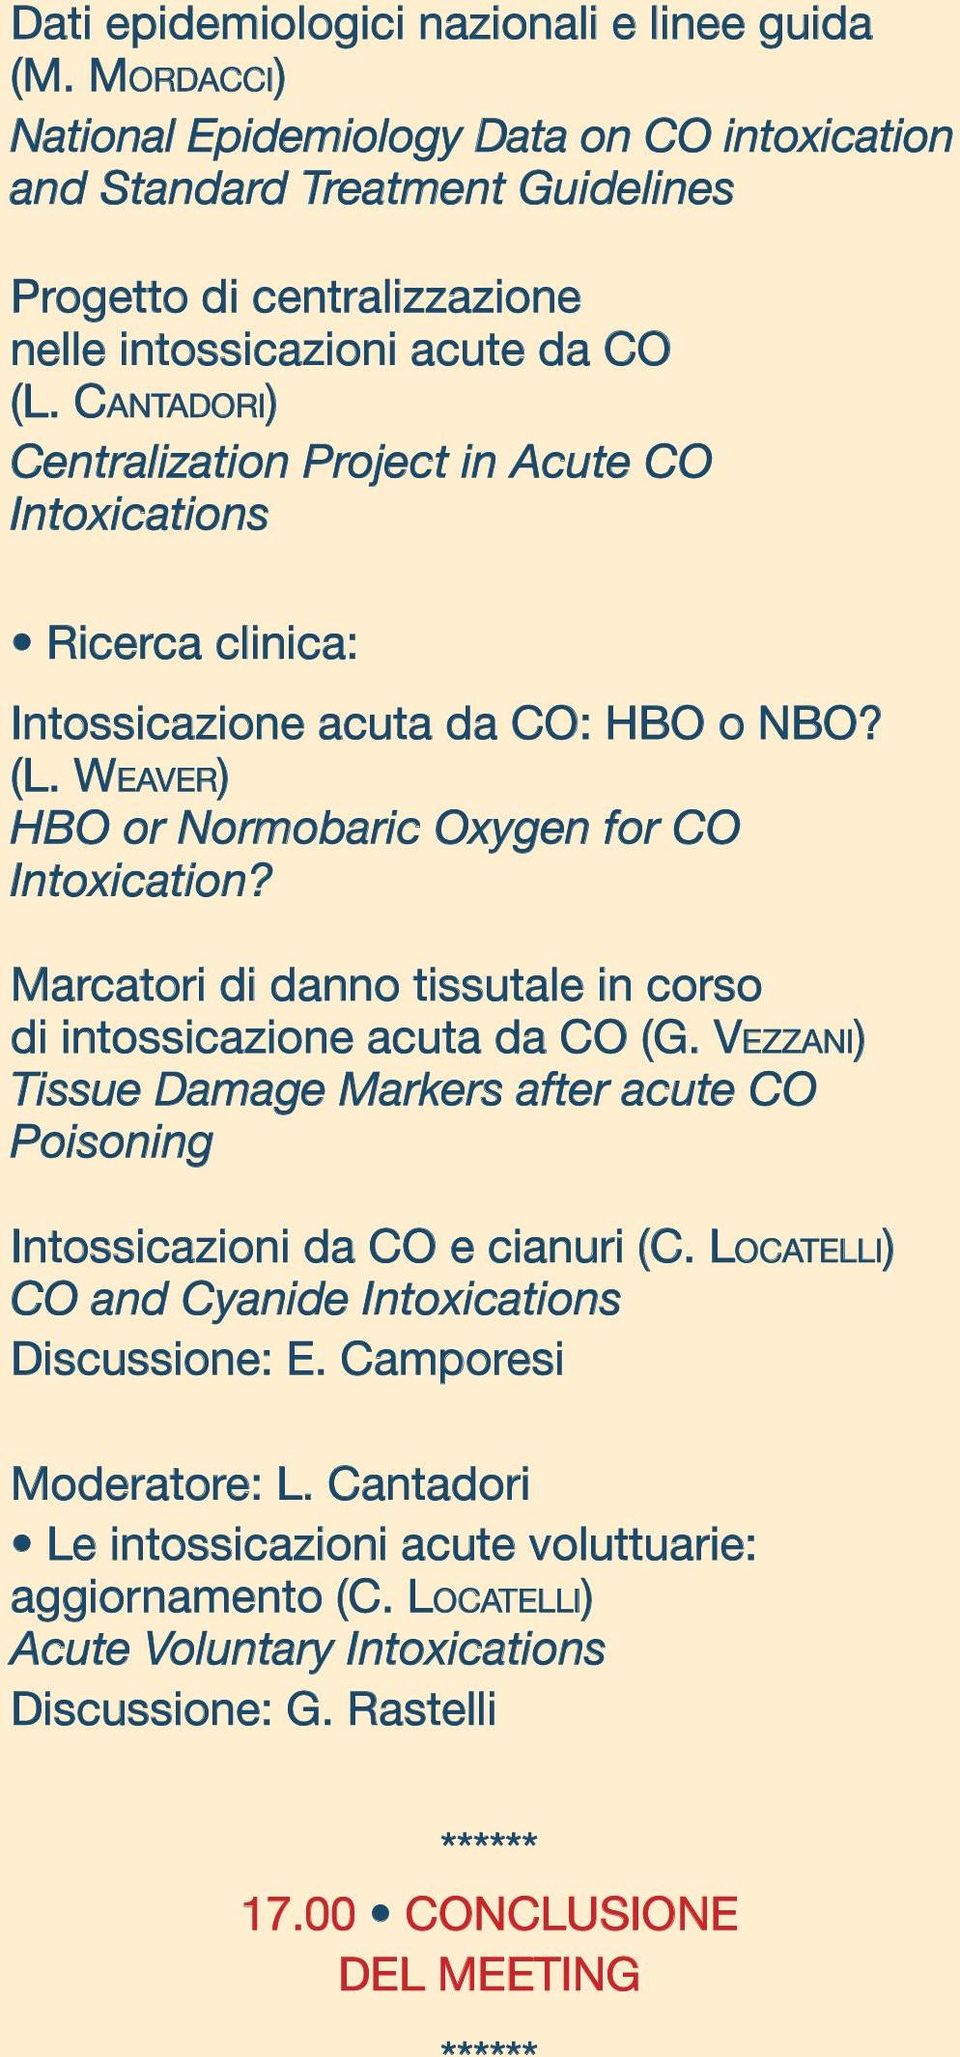 CANTADORI) Centralization Project in Acute CO Intoxications Ricerca clinica: Intossicazione acuta da CO: HBO o NBO? (L. WEAVER) HBO or Normobaric Oxygen for CO Intoxication?